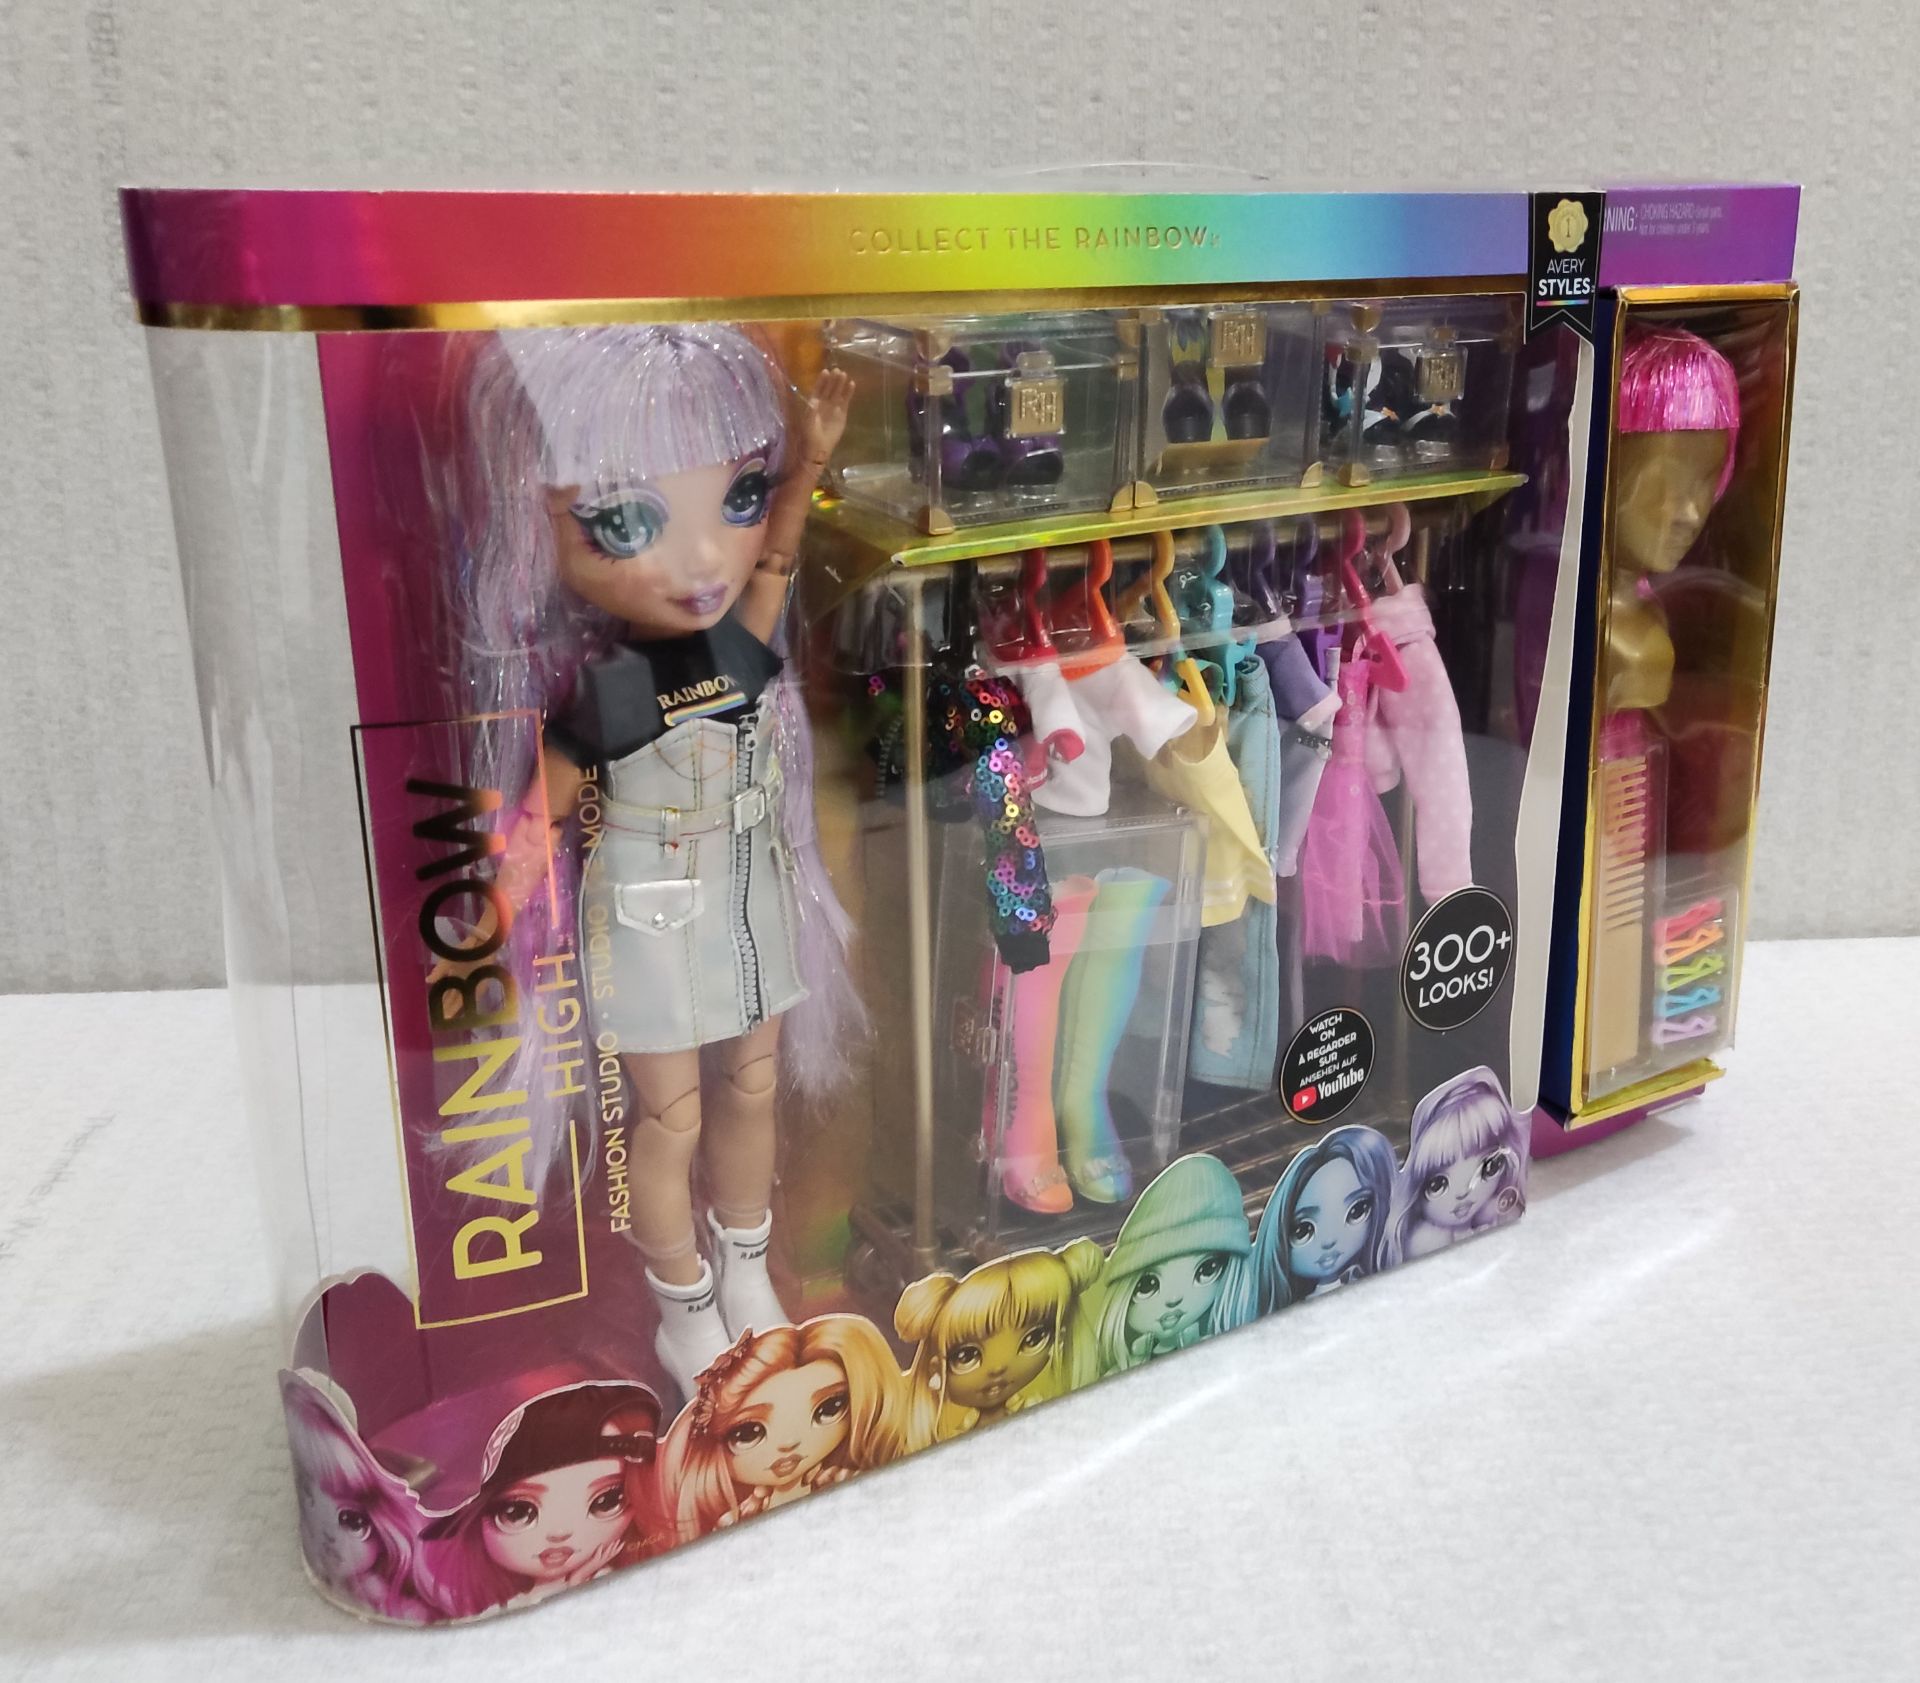 1 x Rainbow High Avery Styles Doll And Fashion Studio - New/Boxed - Image 3 of 4